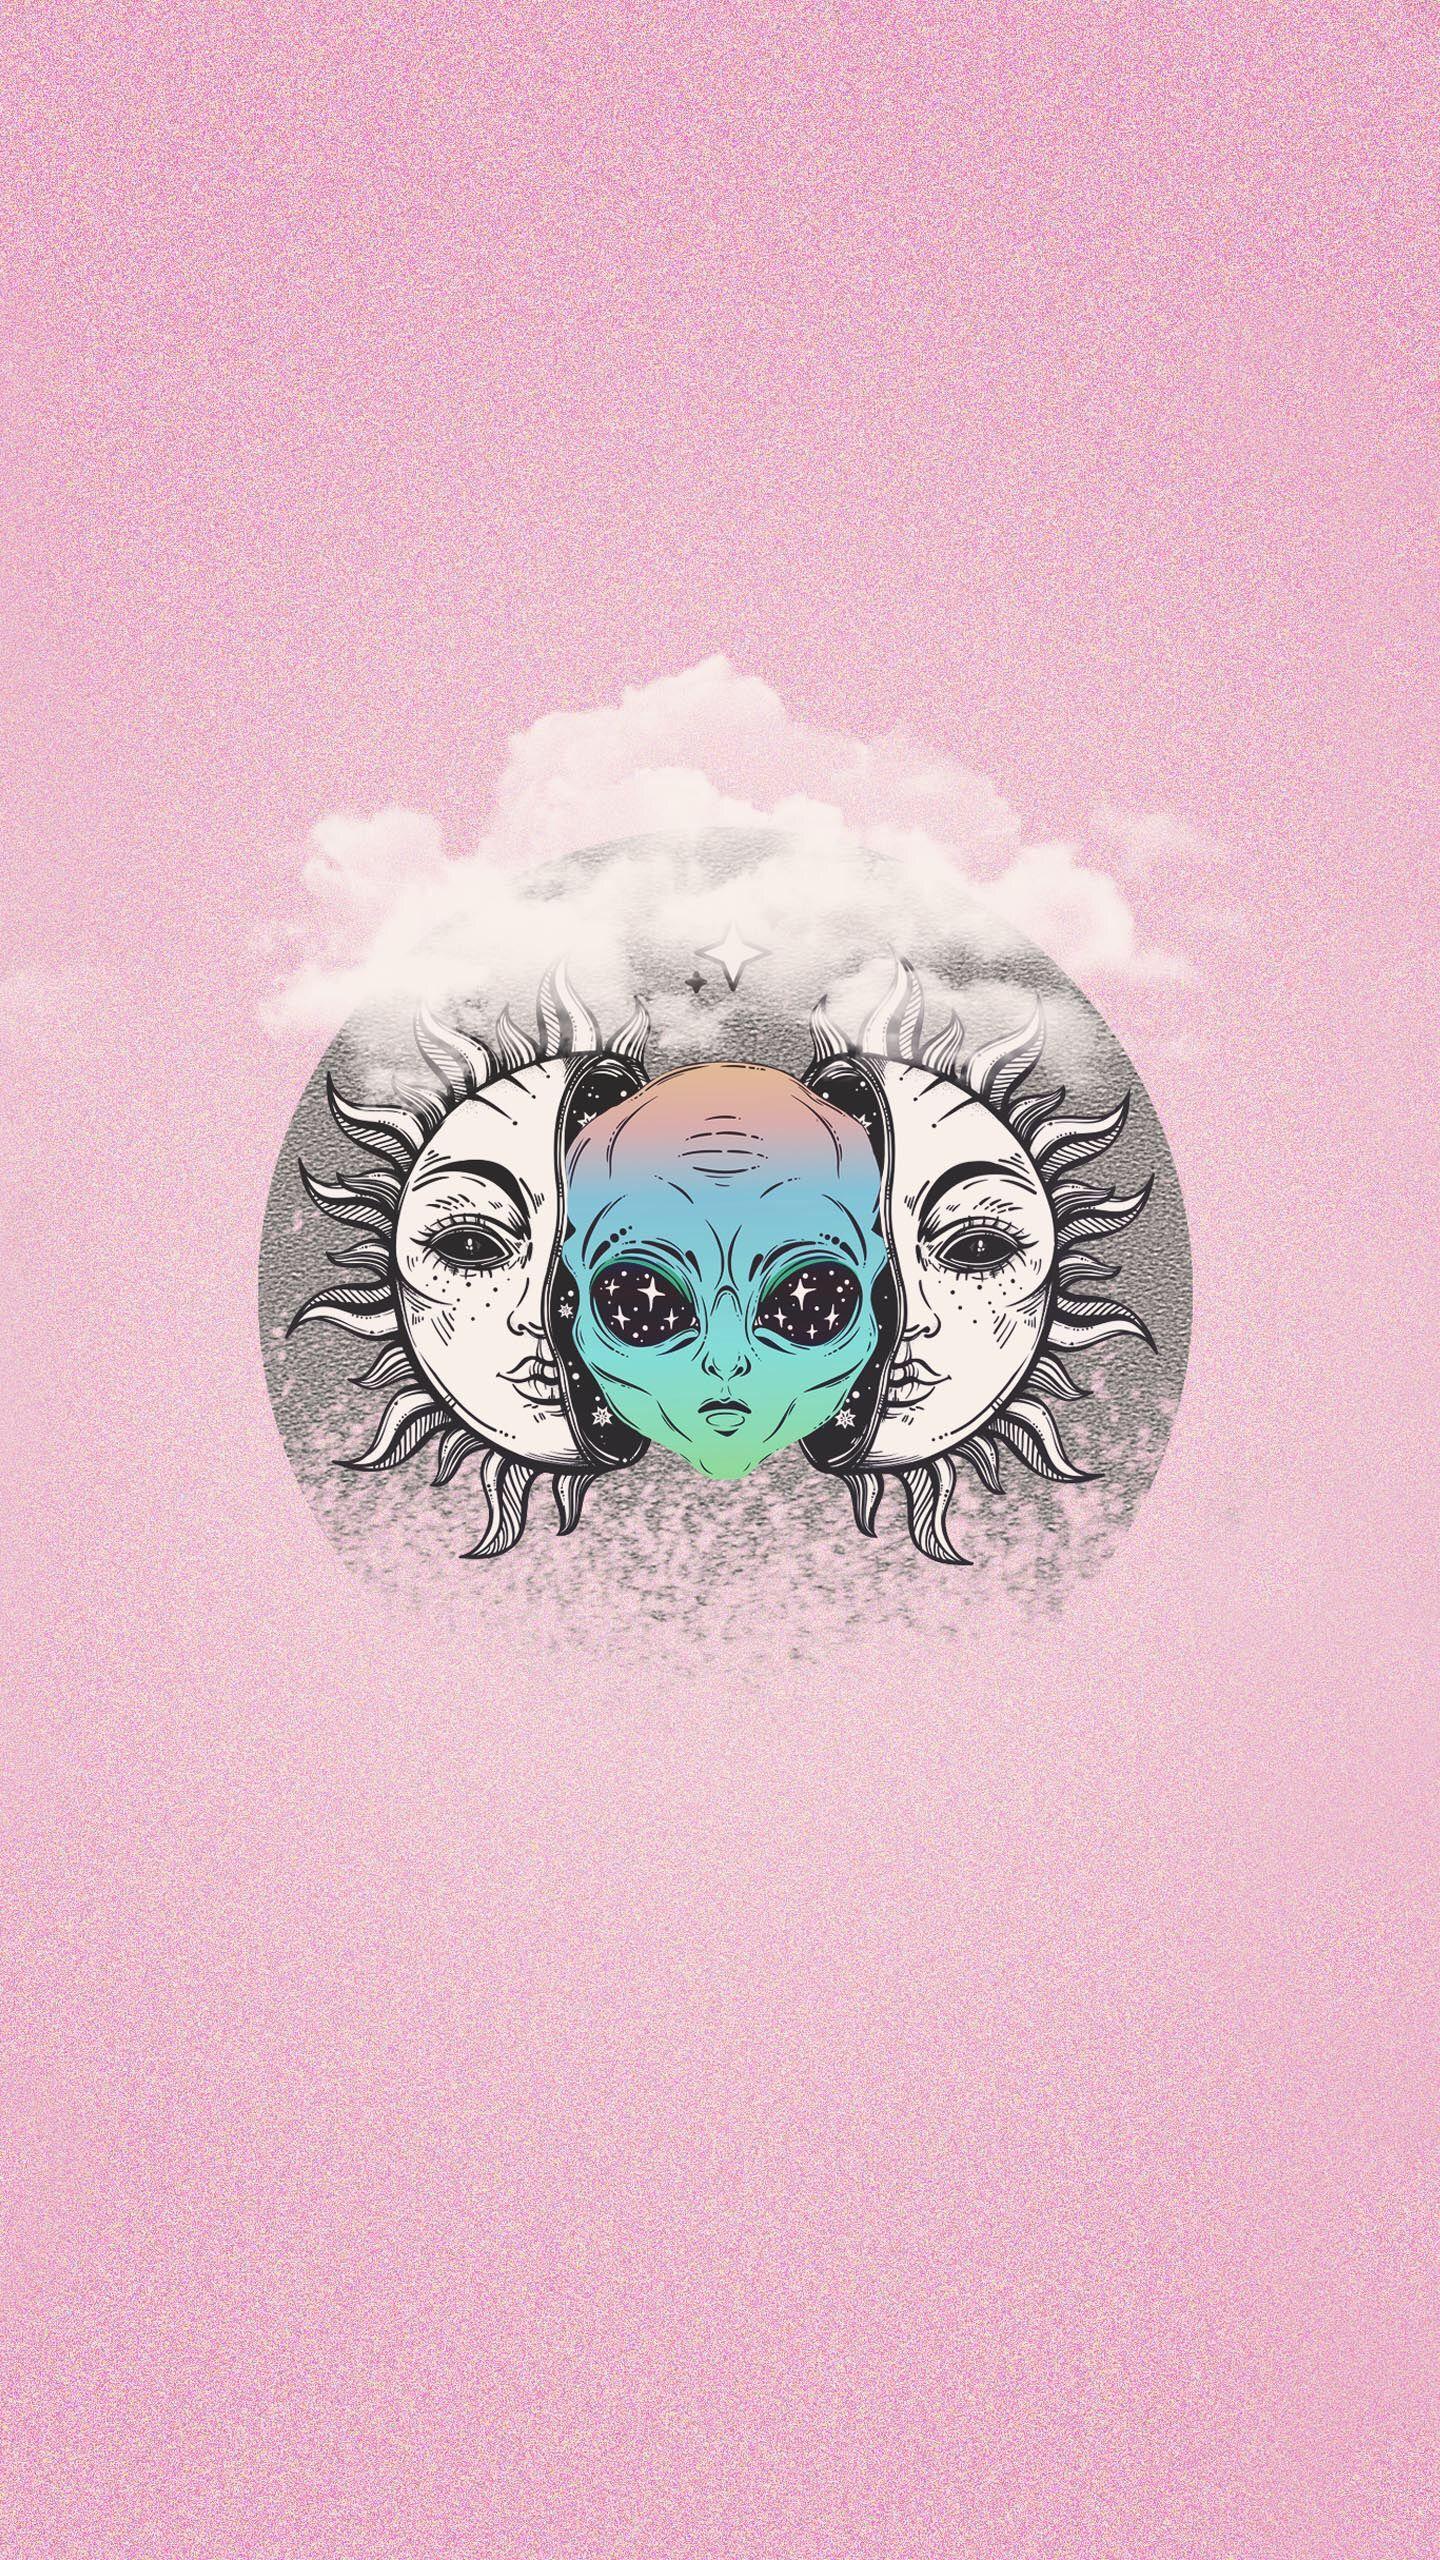 A digital illustration of a sun and moon made out of a face with an alien's head. - Trippy